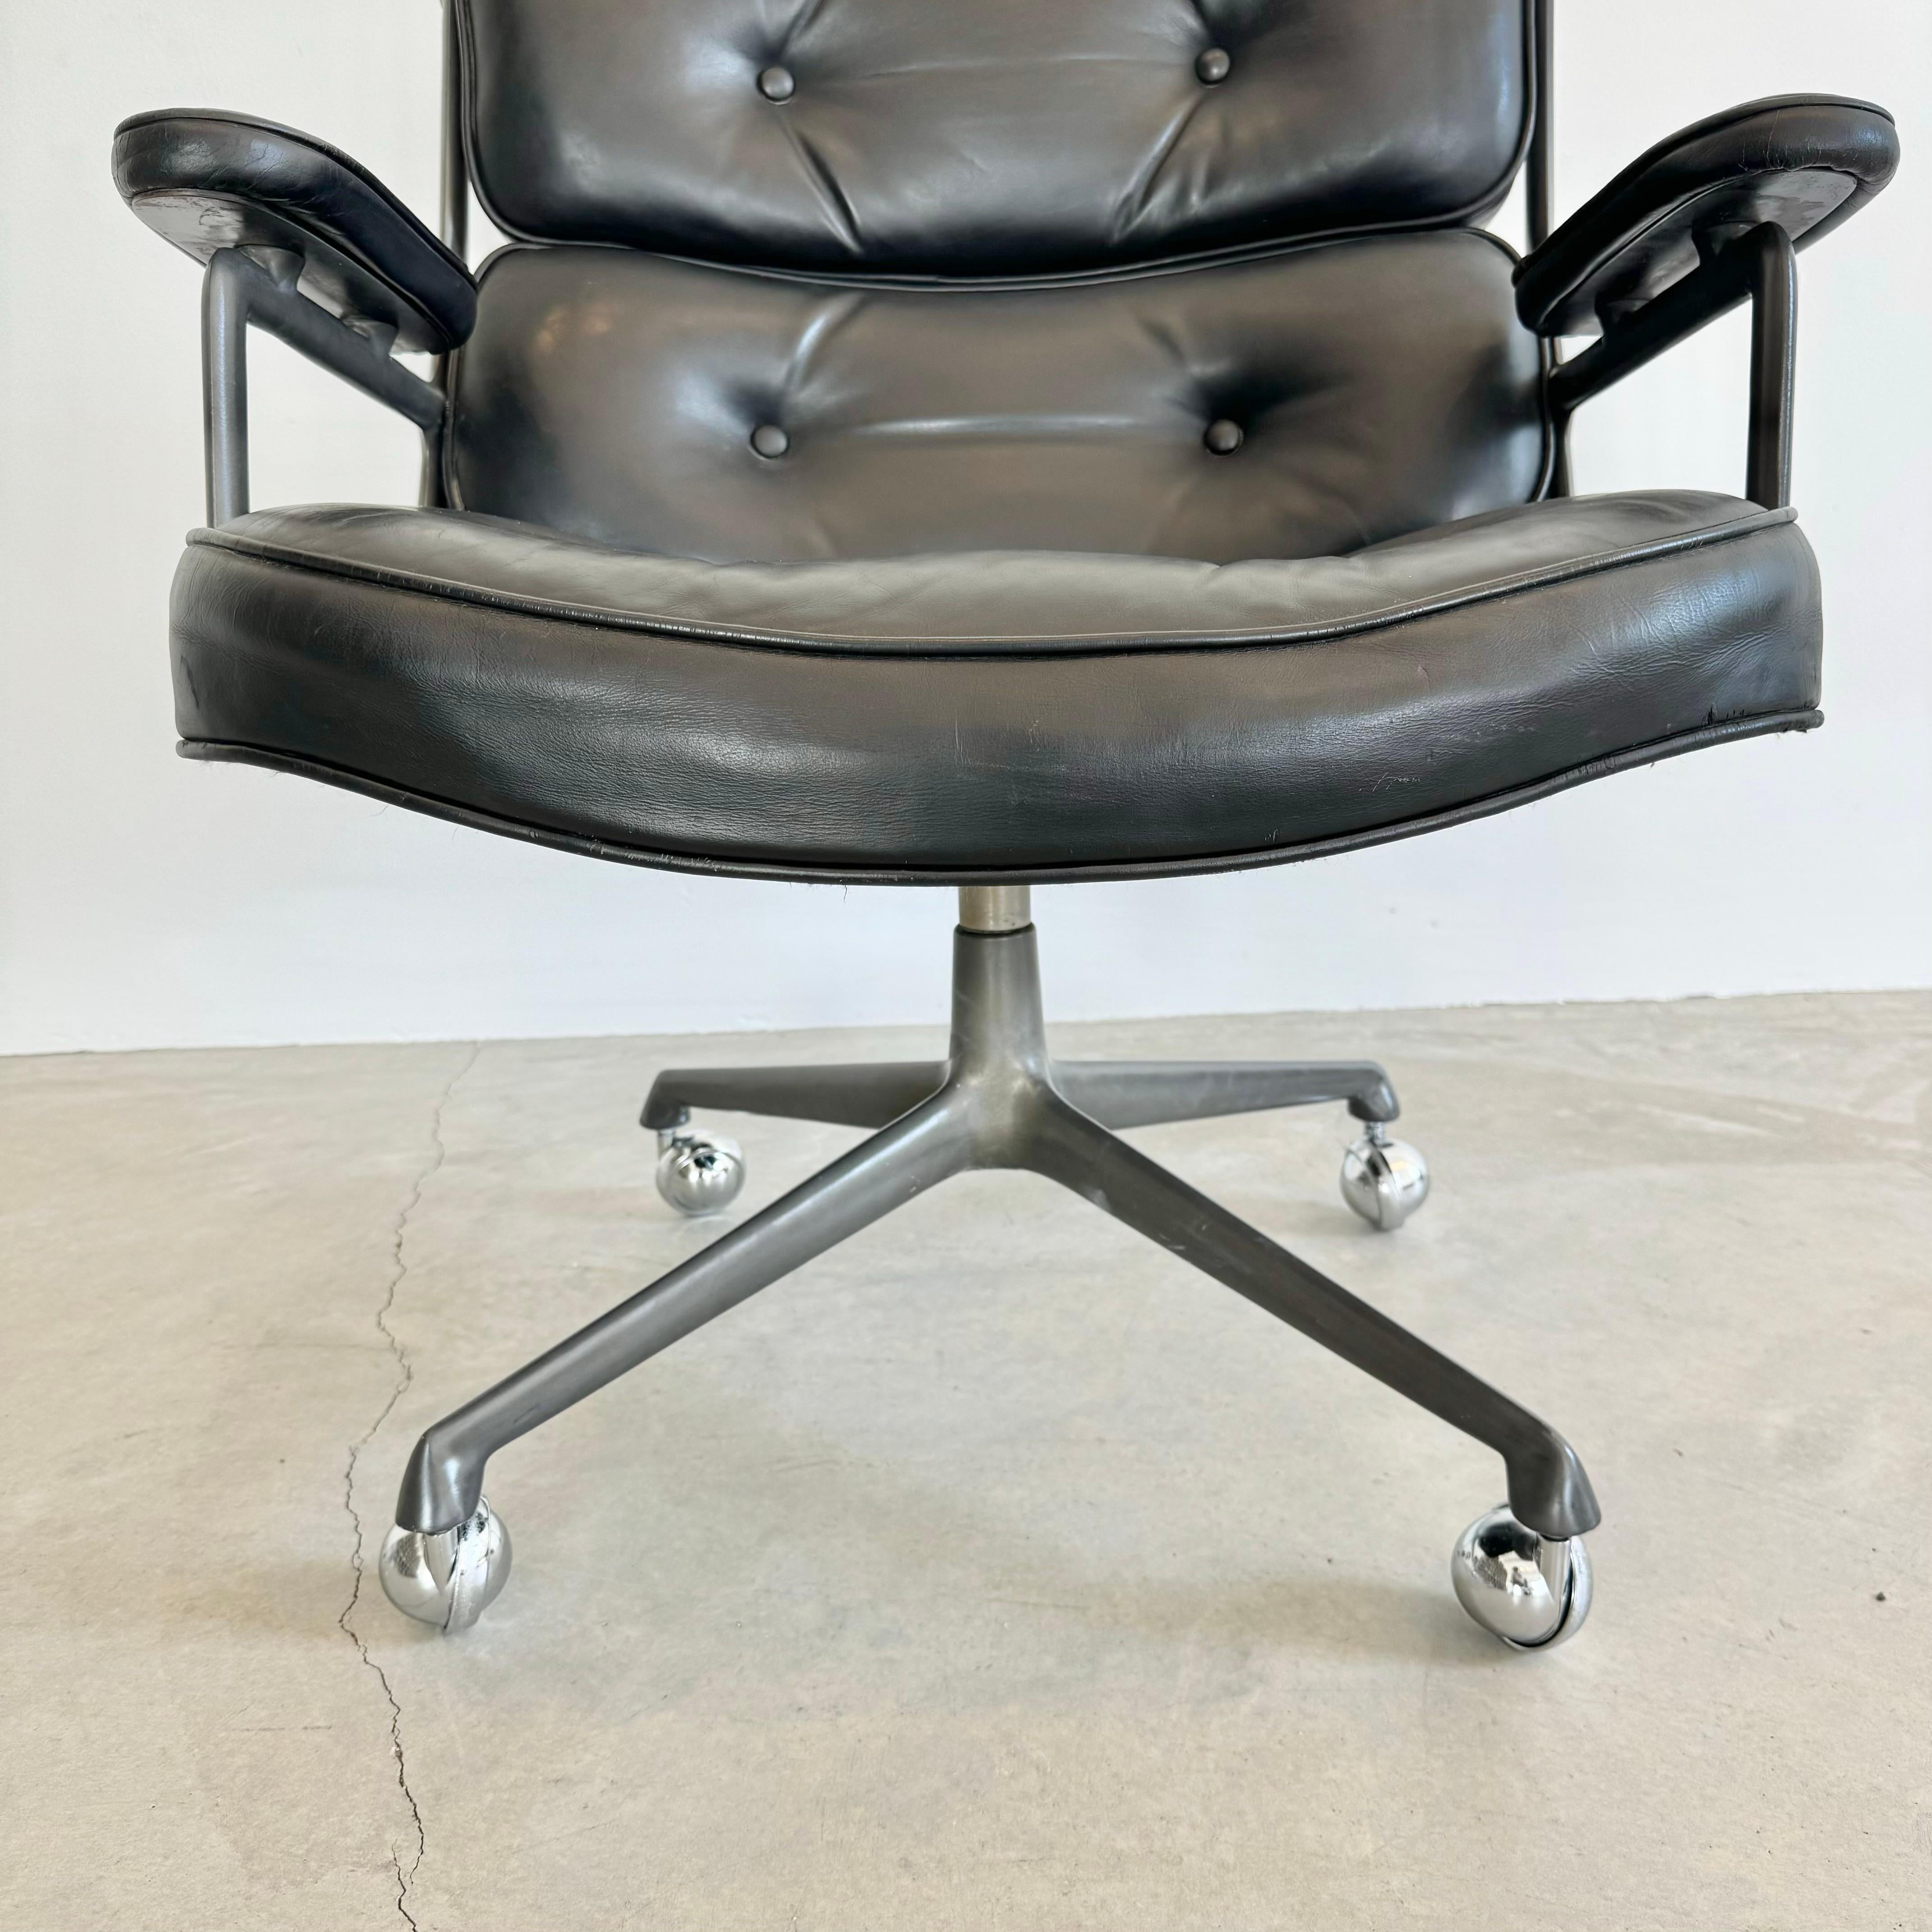 Mid-Century Modern Eames Time Life Lobby Lounge Chair in Black Leather for Herman Miller, 1980s USA For Sale